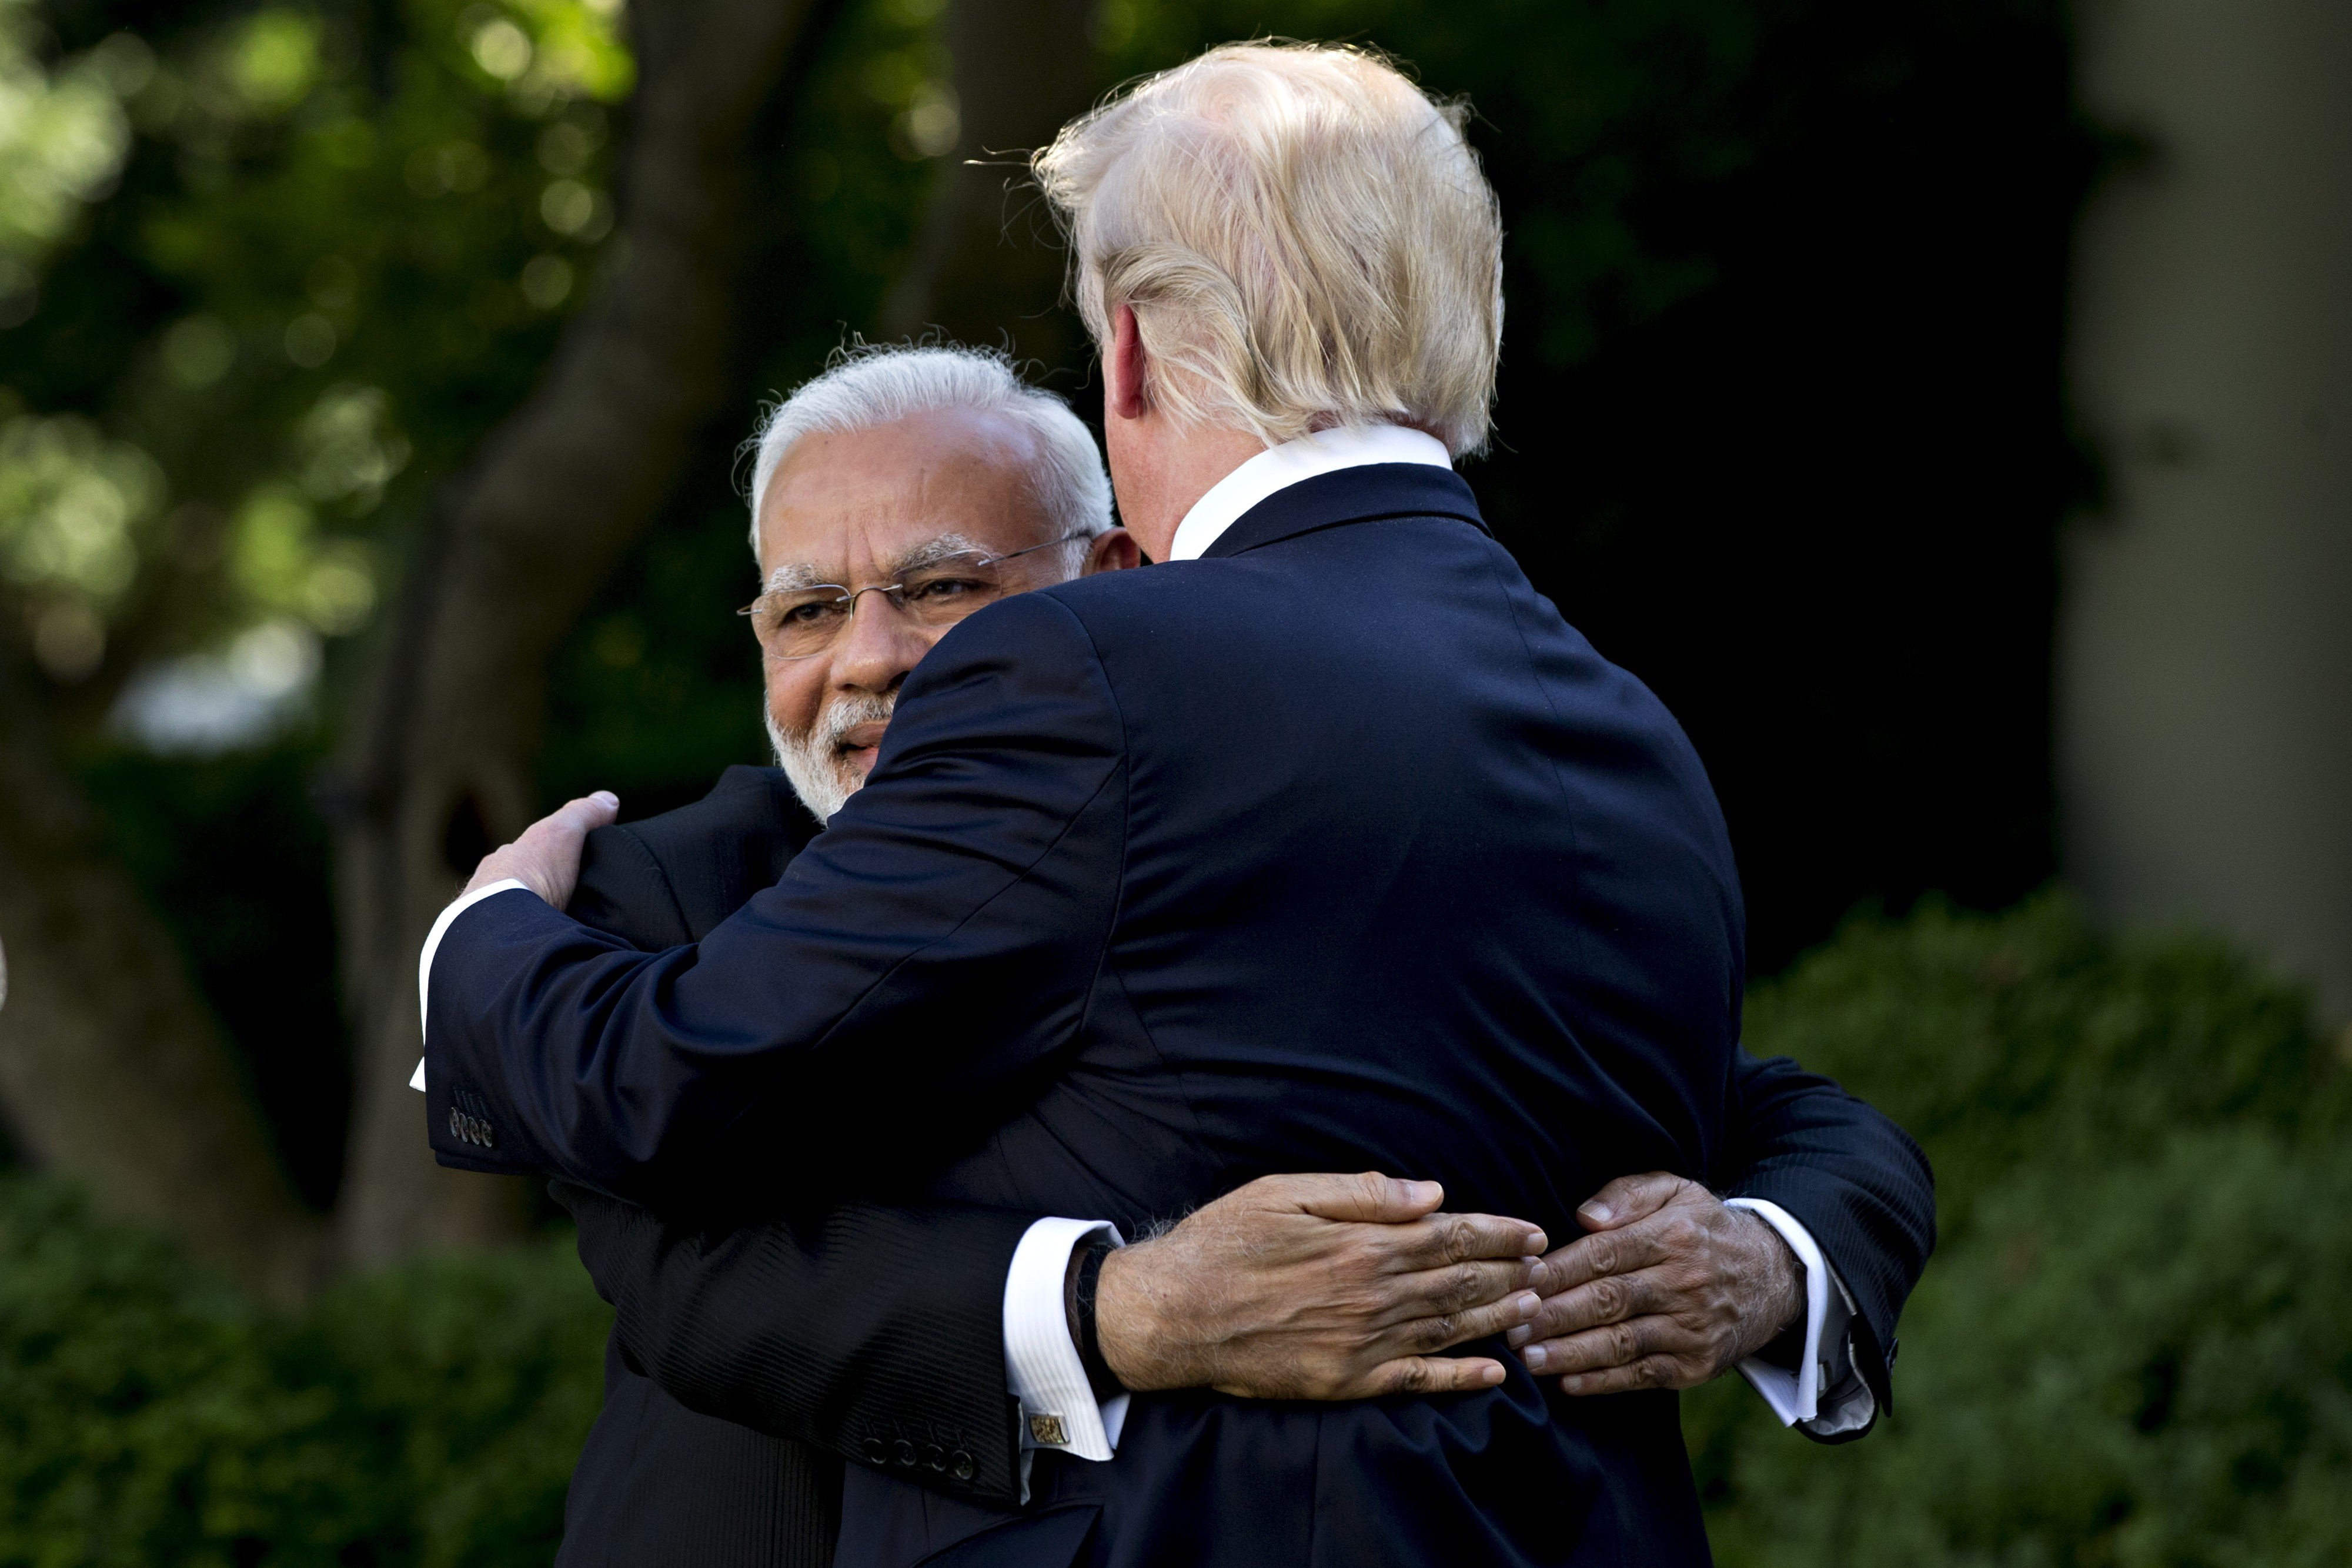 Narendra Modi, India's prime minister, left, embraces US President Donald Trump during a joint statement in the Rose Garden of the White House in Washington in June. Photo: Bloomberg